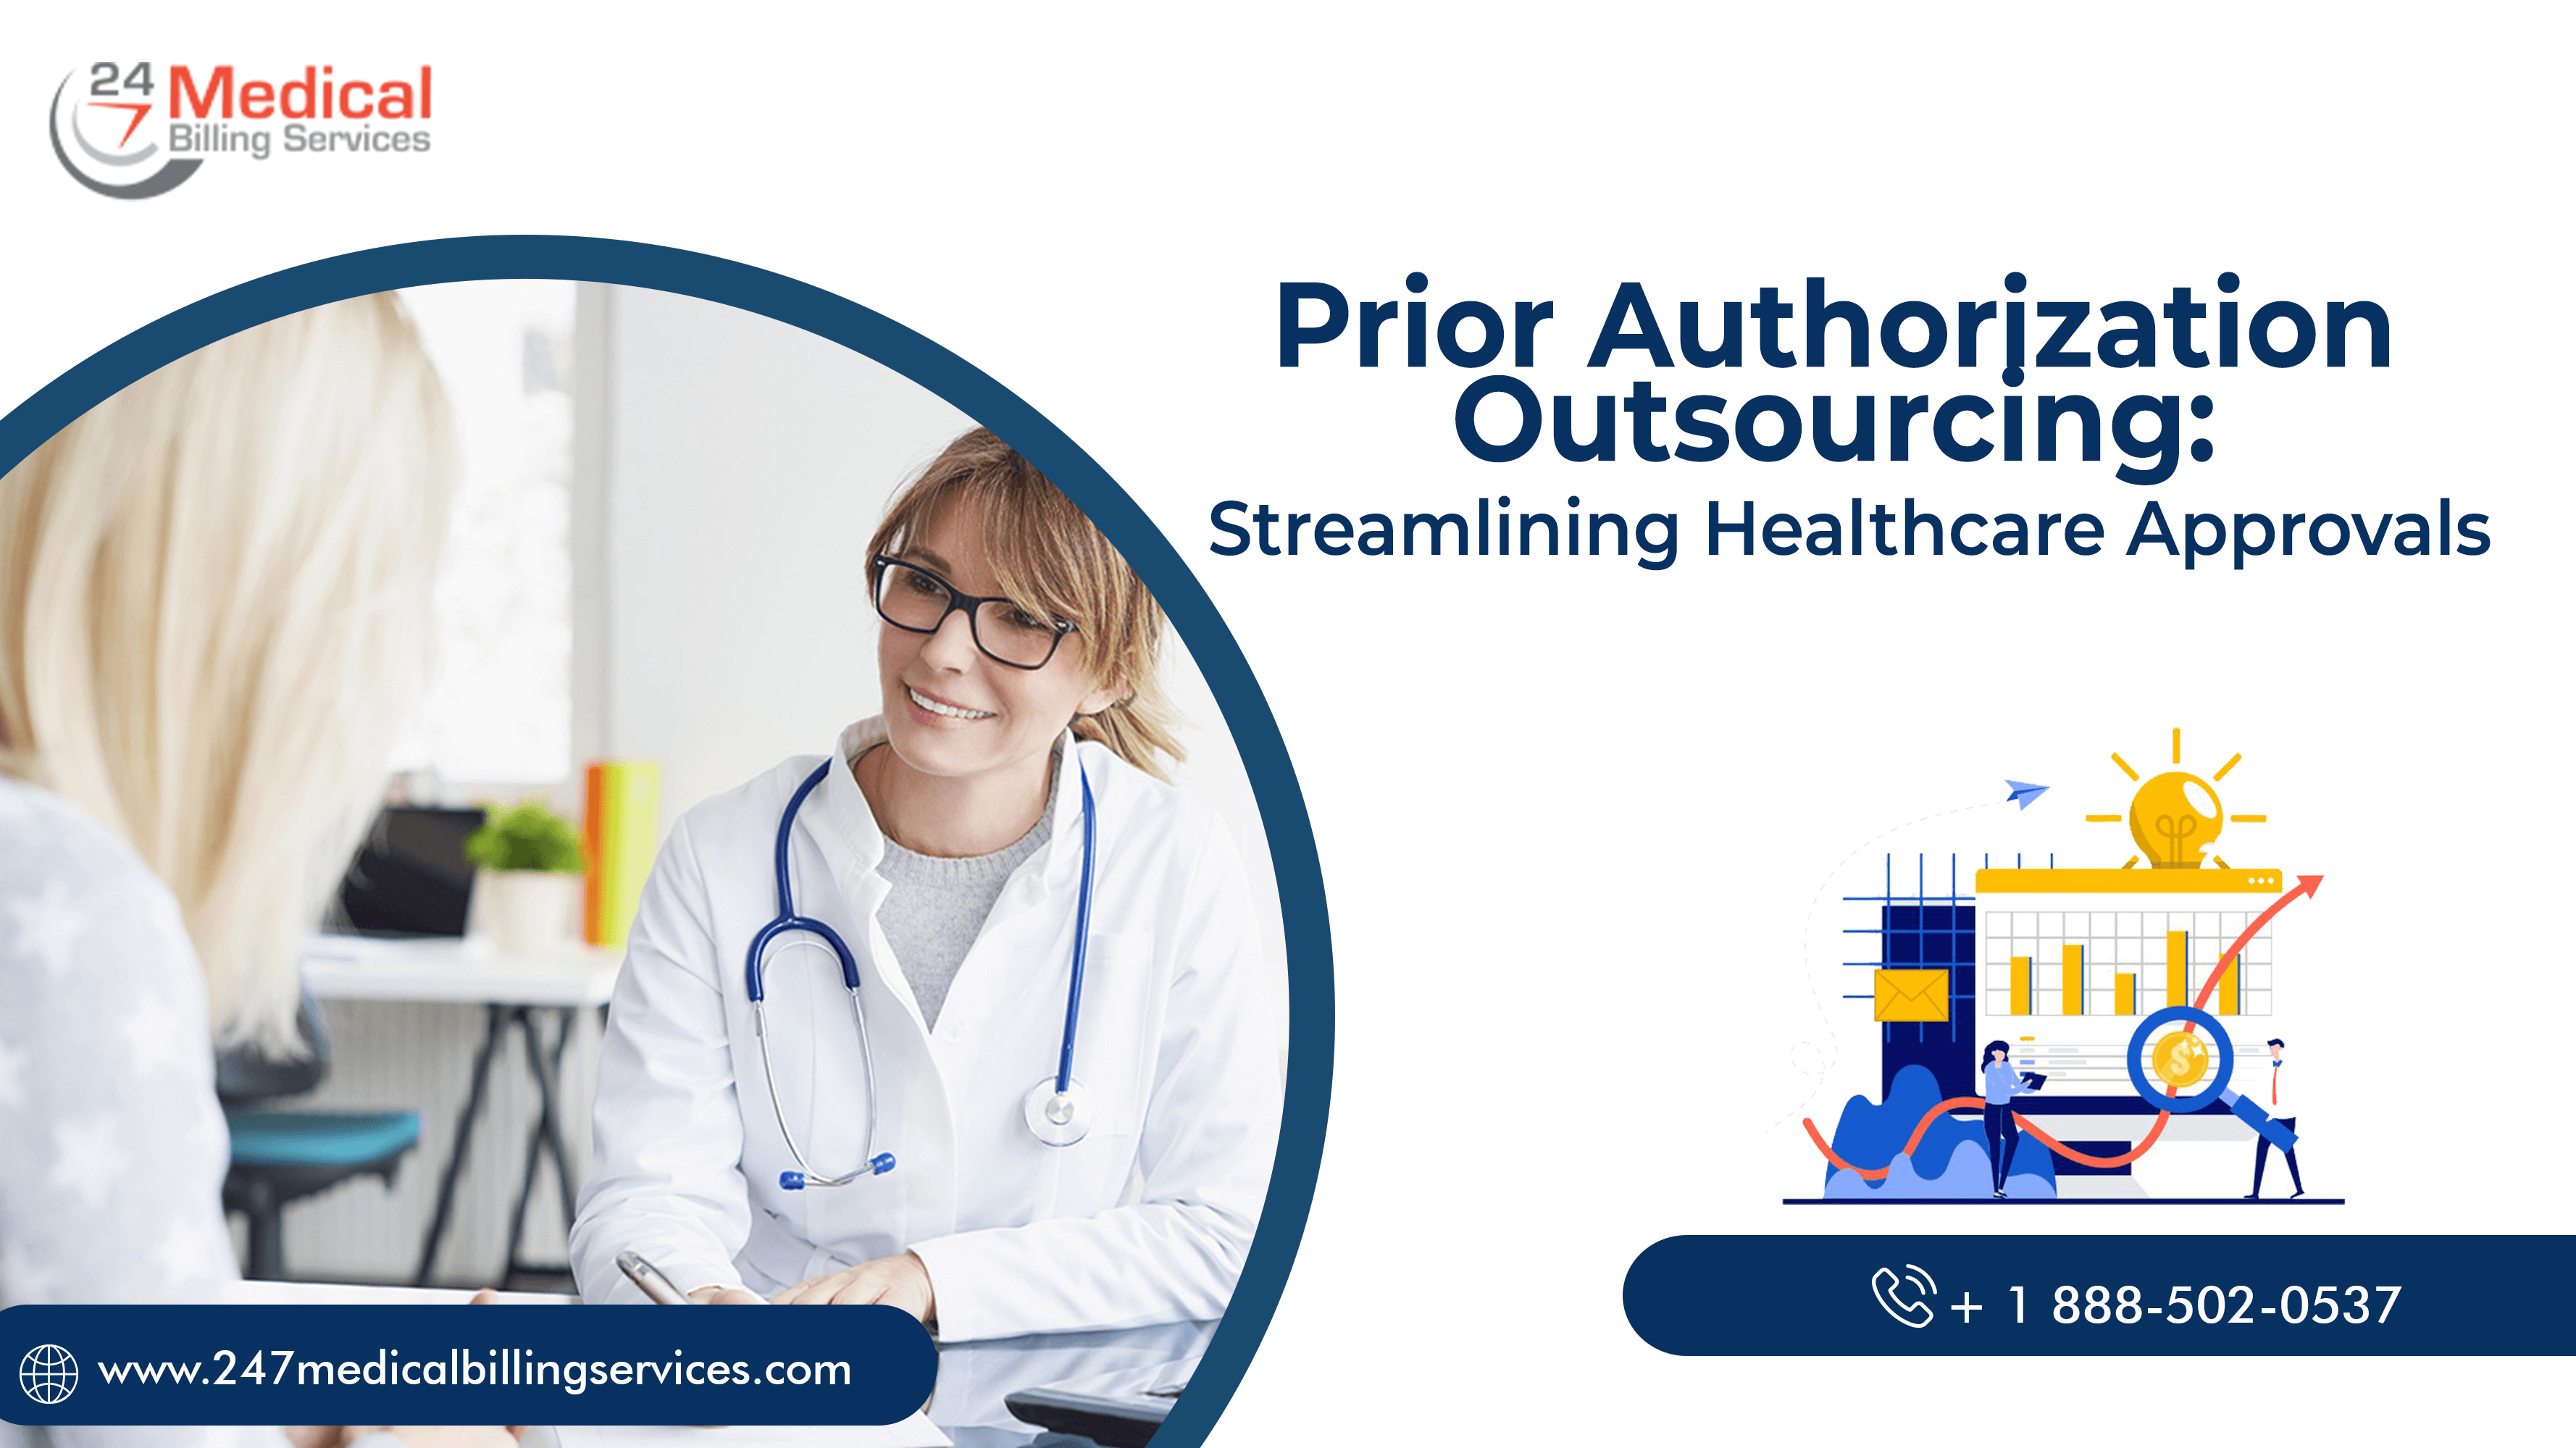  Prior Authorization Outsourcing: Streamlining Healthcare Approvals